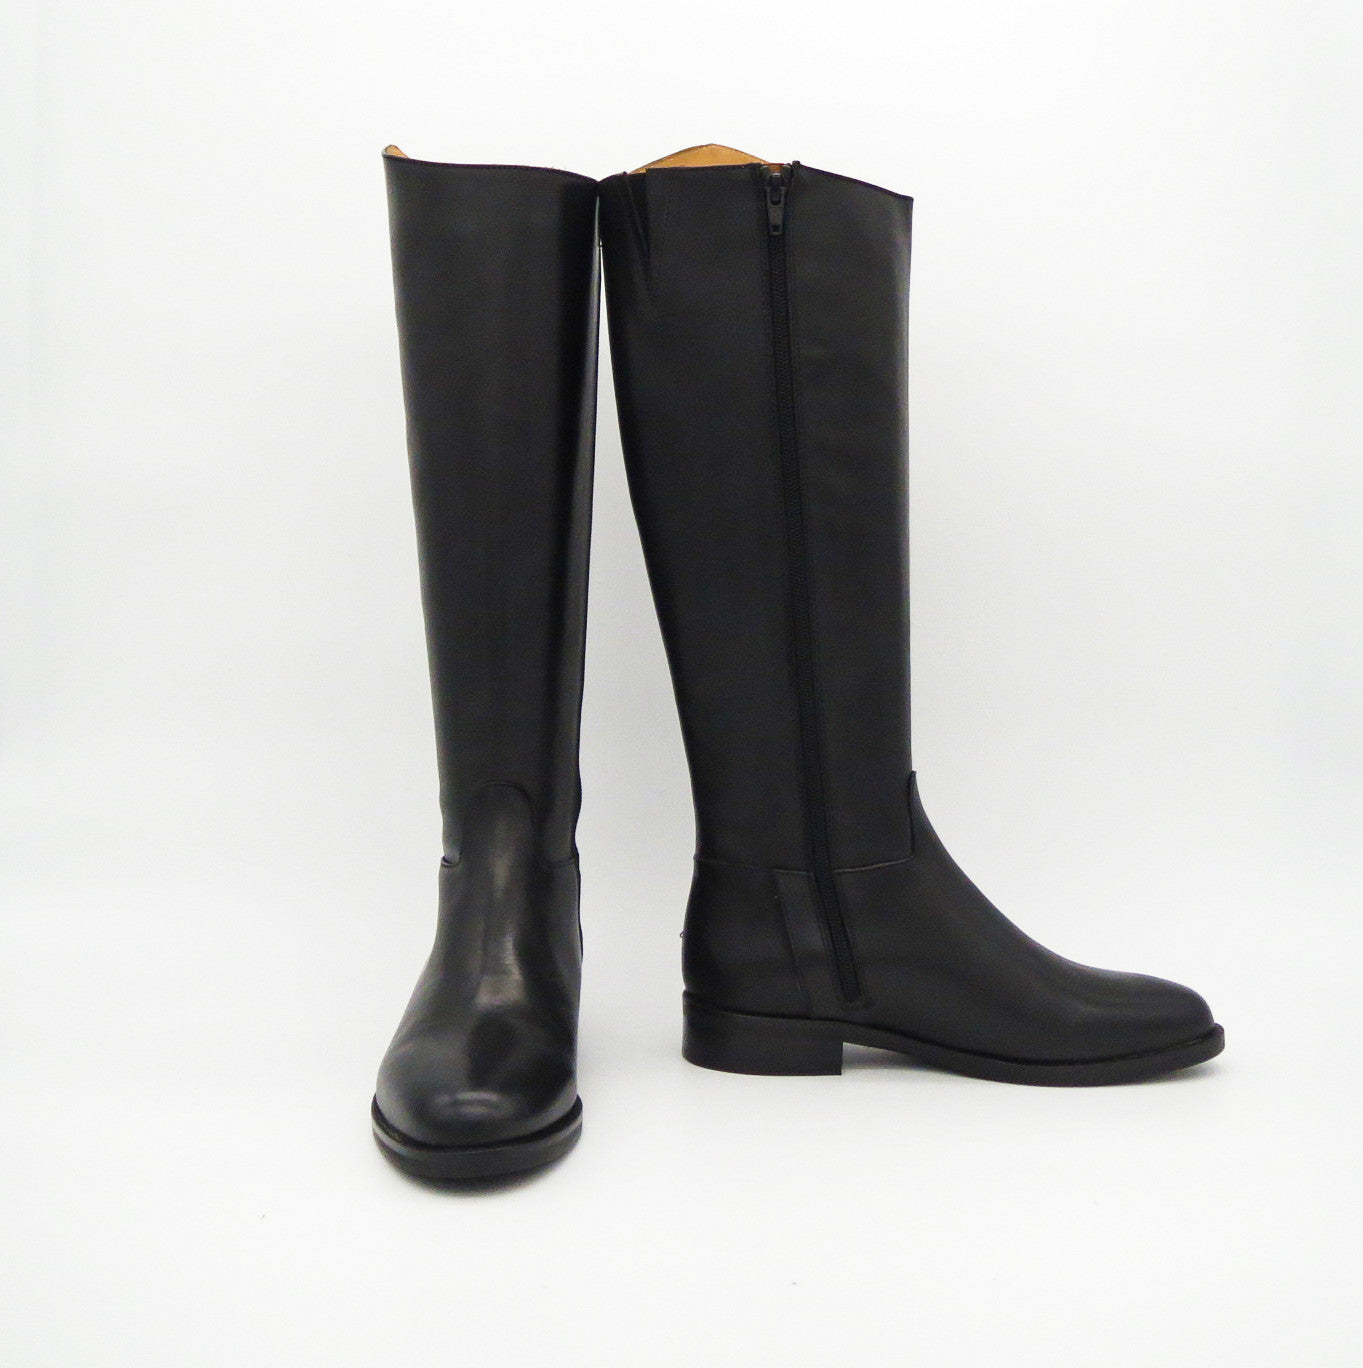 Women's Black Genuine Leather Boots,leather Boots for Women